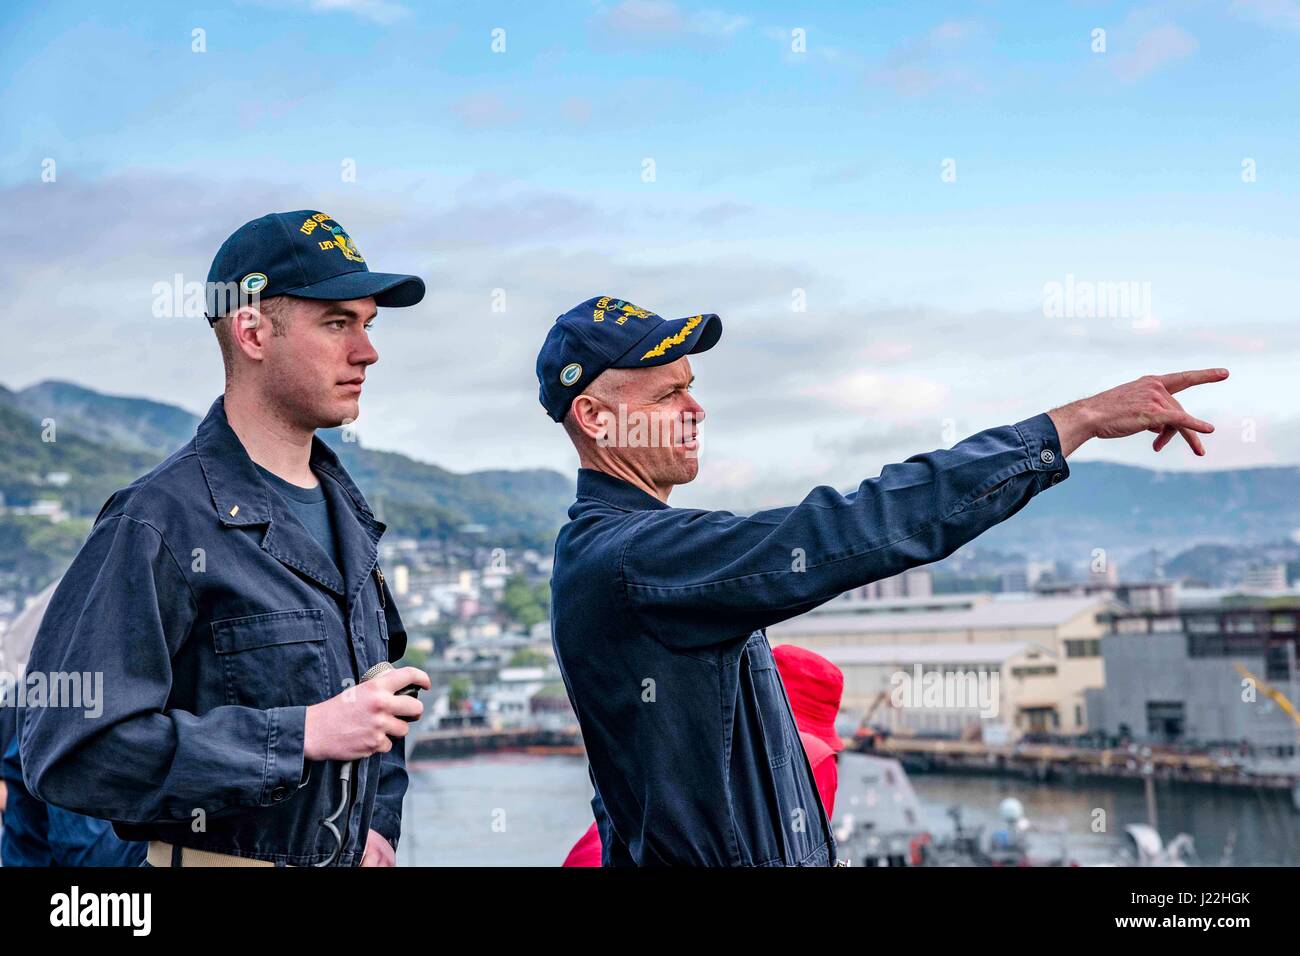 170418-N-JH293-008 SASEBO, Japan (April 18, 2017) Capt. Nathan Moyer, commanding officer of the amphibious transport dock USS Green Bay (LPD 20), points out the ship’s position to the conning officer, Ens. Zachary Fuller, as Green Bay departs Sasebo, Japan. Green Bay, assigned to Commander, Amphibious Squadron 11, is conducting at-sea preparations for its upcoming Mid-Cycle Inspection (MCI). MCI is conducted at the mid-year point prior to the Board of Inspection and Survey (INSURV) and is used to inspect and assess the material conditions of a ship. (U.S. Navy photo by Mass Communication Speci Stock Photo